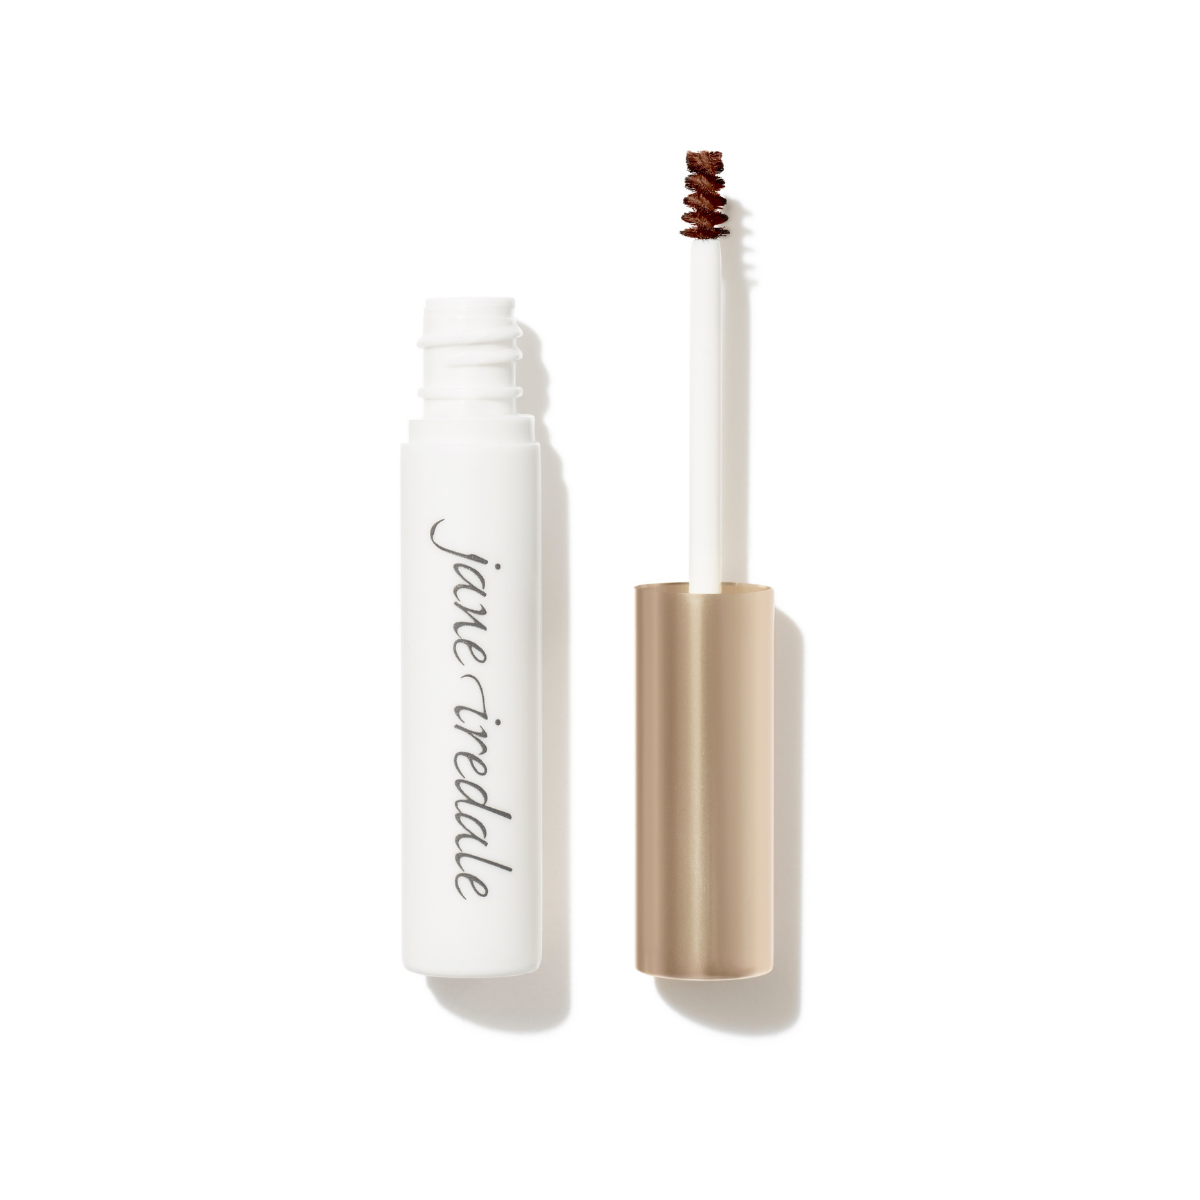 Jane Iredale PureBrow Brow Gel in Auburn Shop At Exclusive Beauty